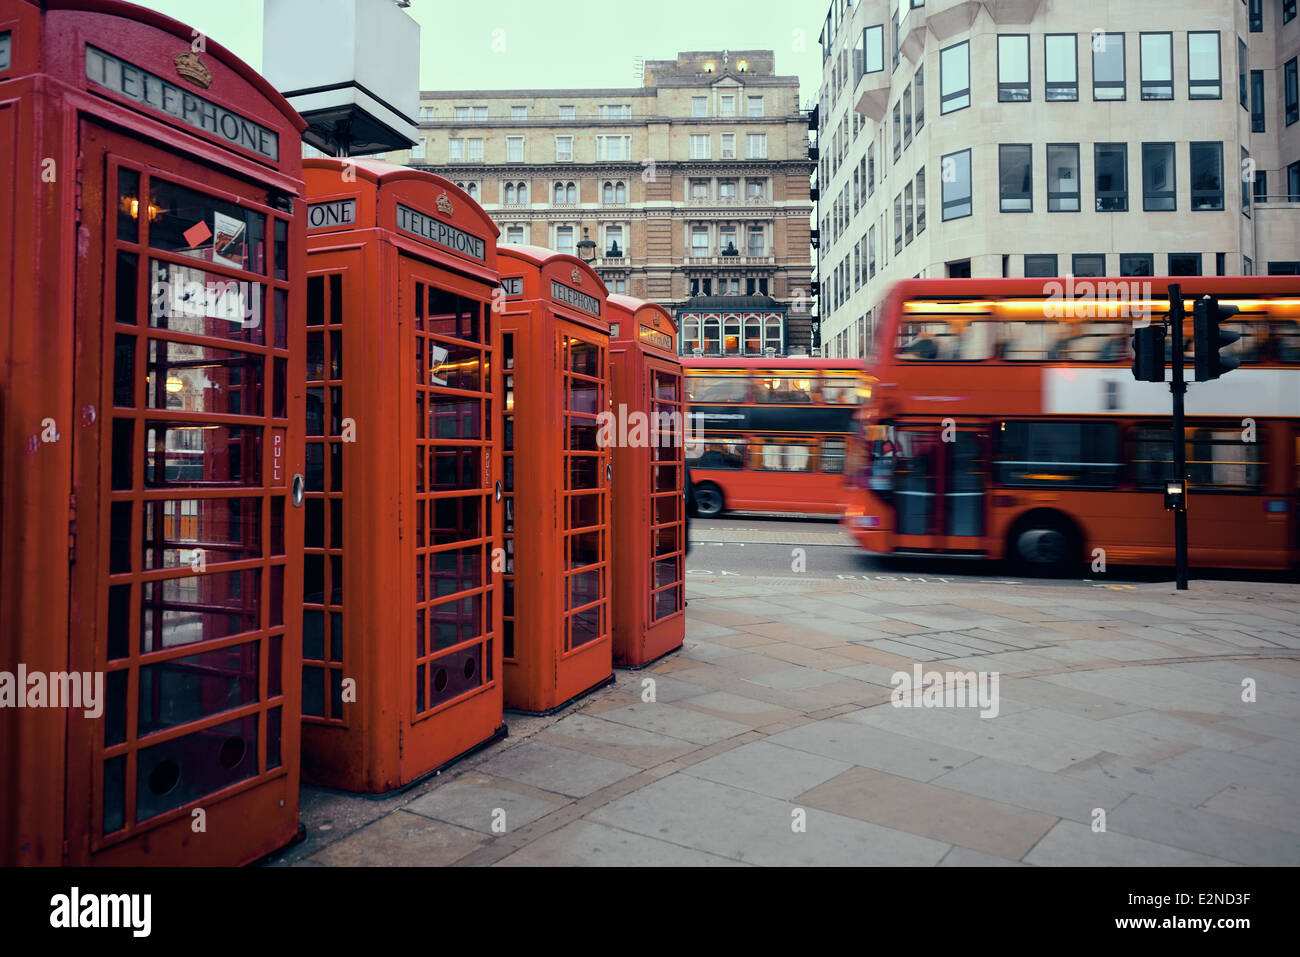 Red telephone box and bus in street with historical architecture in London. Stock Photo